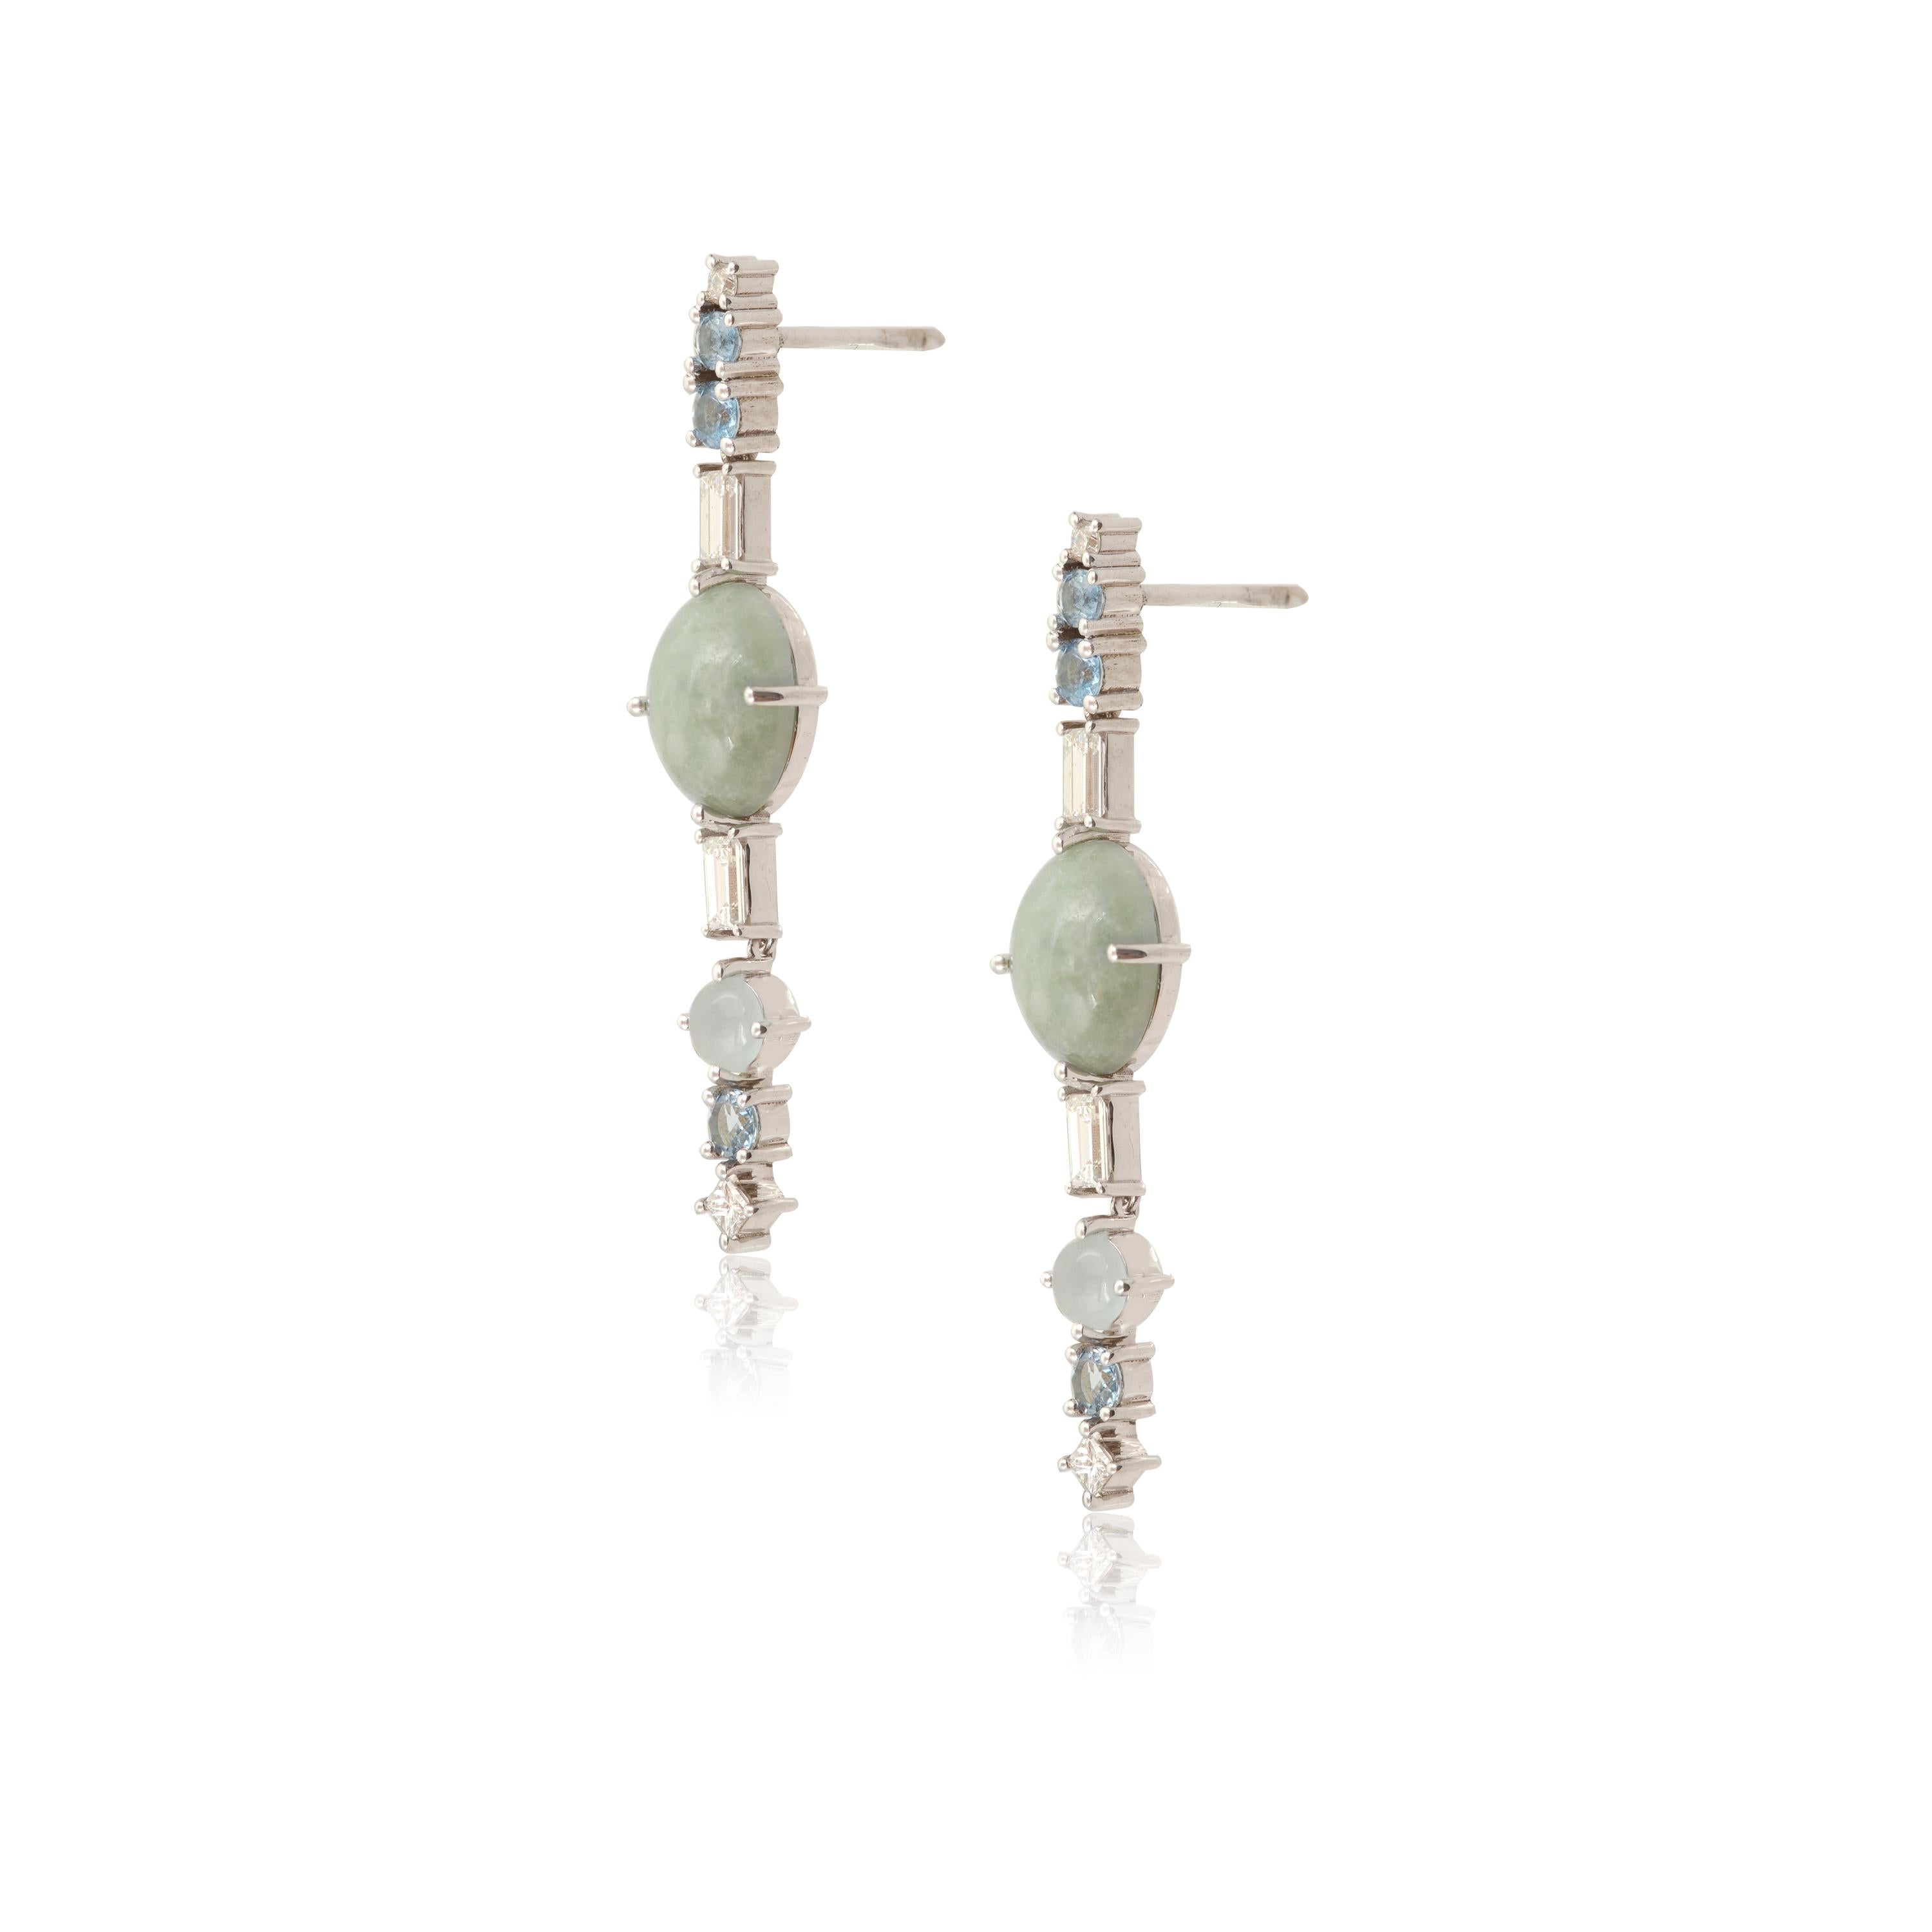 Designer: Alexia Gryllaki
Dimensions: L43x9mm
Weight: approximately 5.6g (pair) 
Barcode: OFS007

Multi-stone long earrings in 18 karat white gold with oval cabochon jadeites approx. 5.50cts, round faceted aquamarines approx. 1.82cts, round